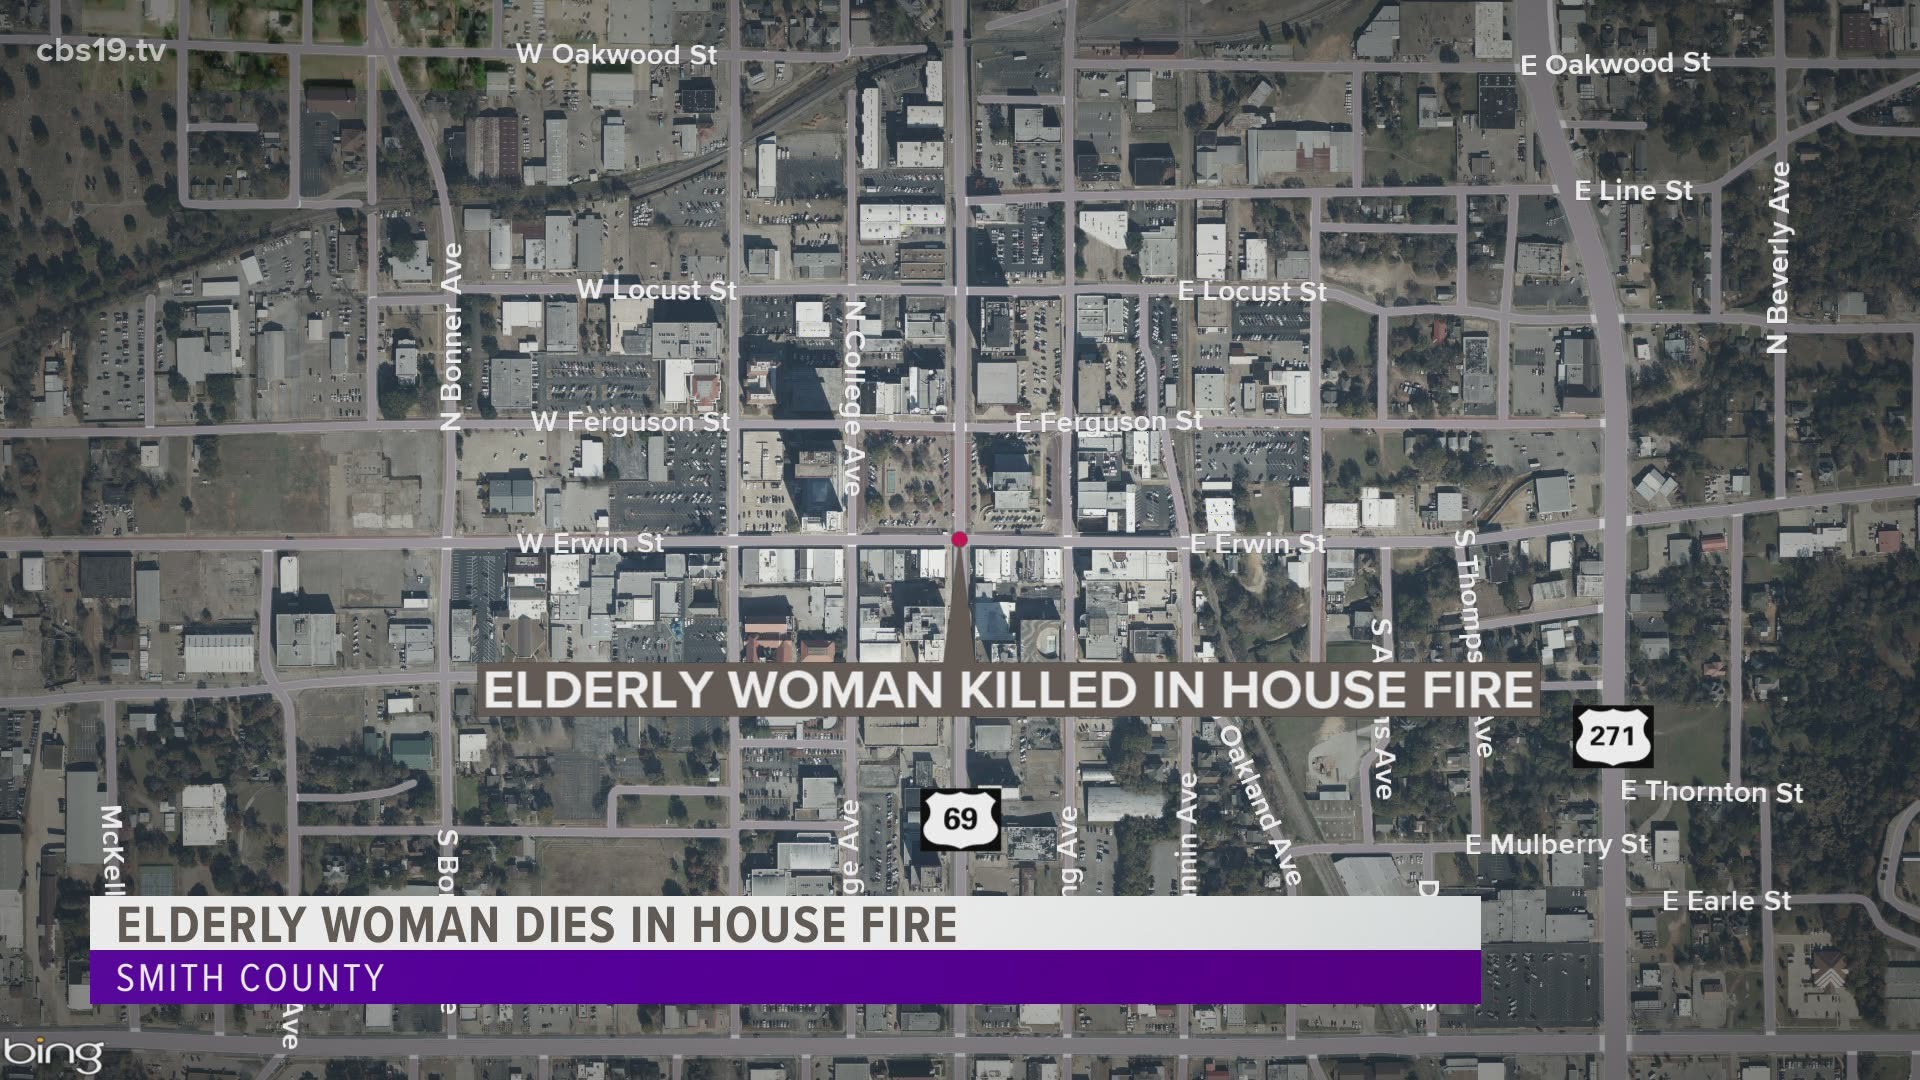 The fire occurred Tuesday afternoon in the 1200 block of Garland Street.